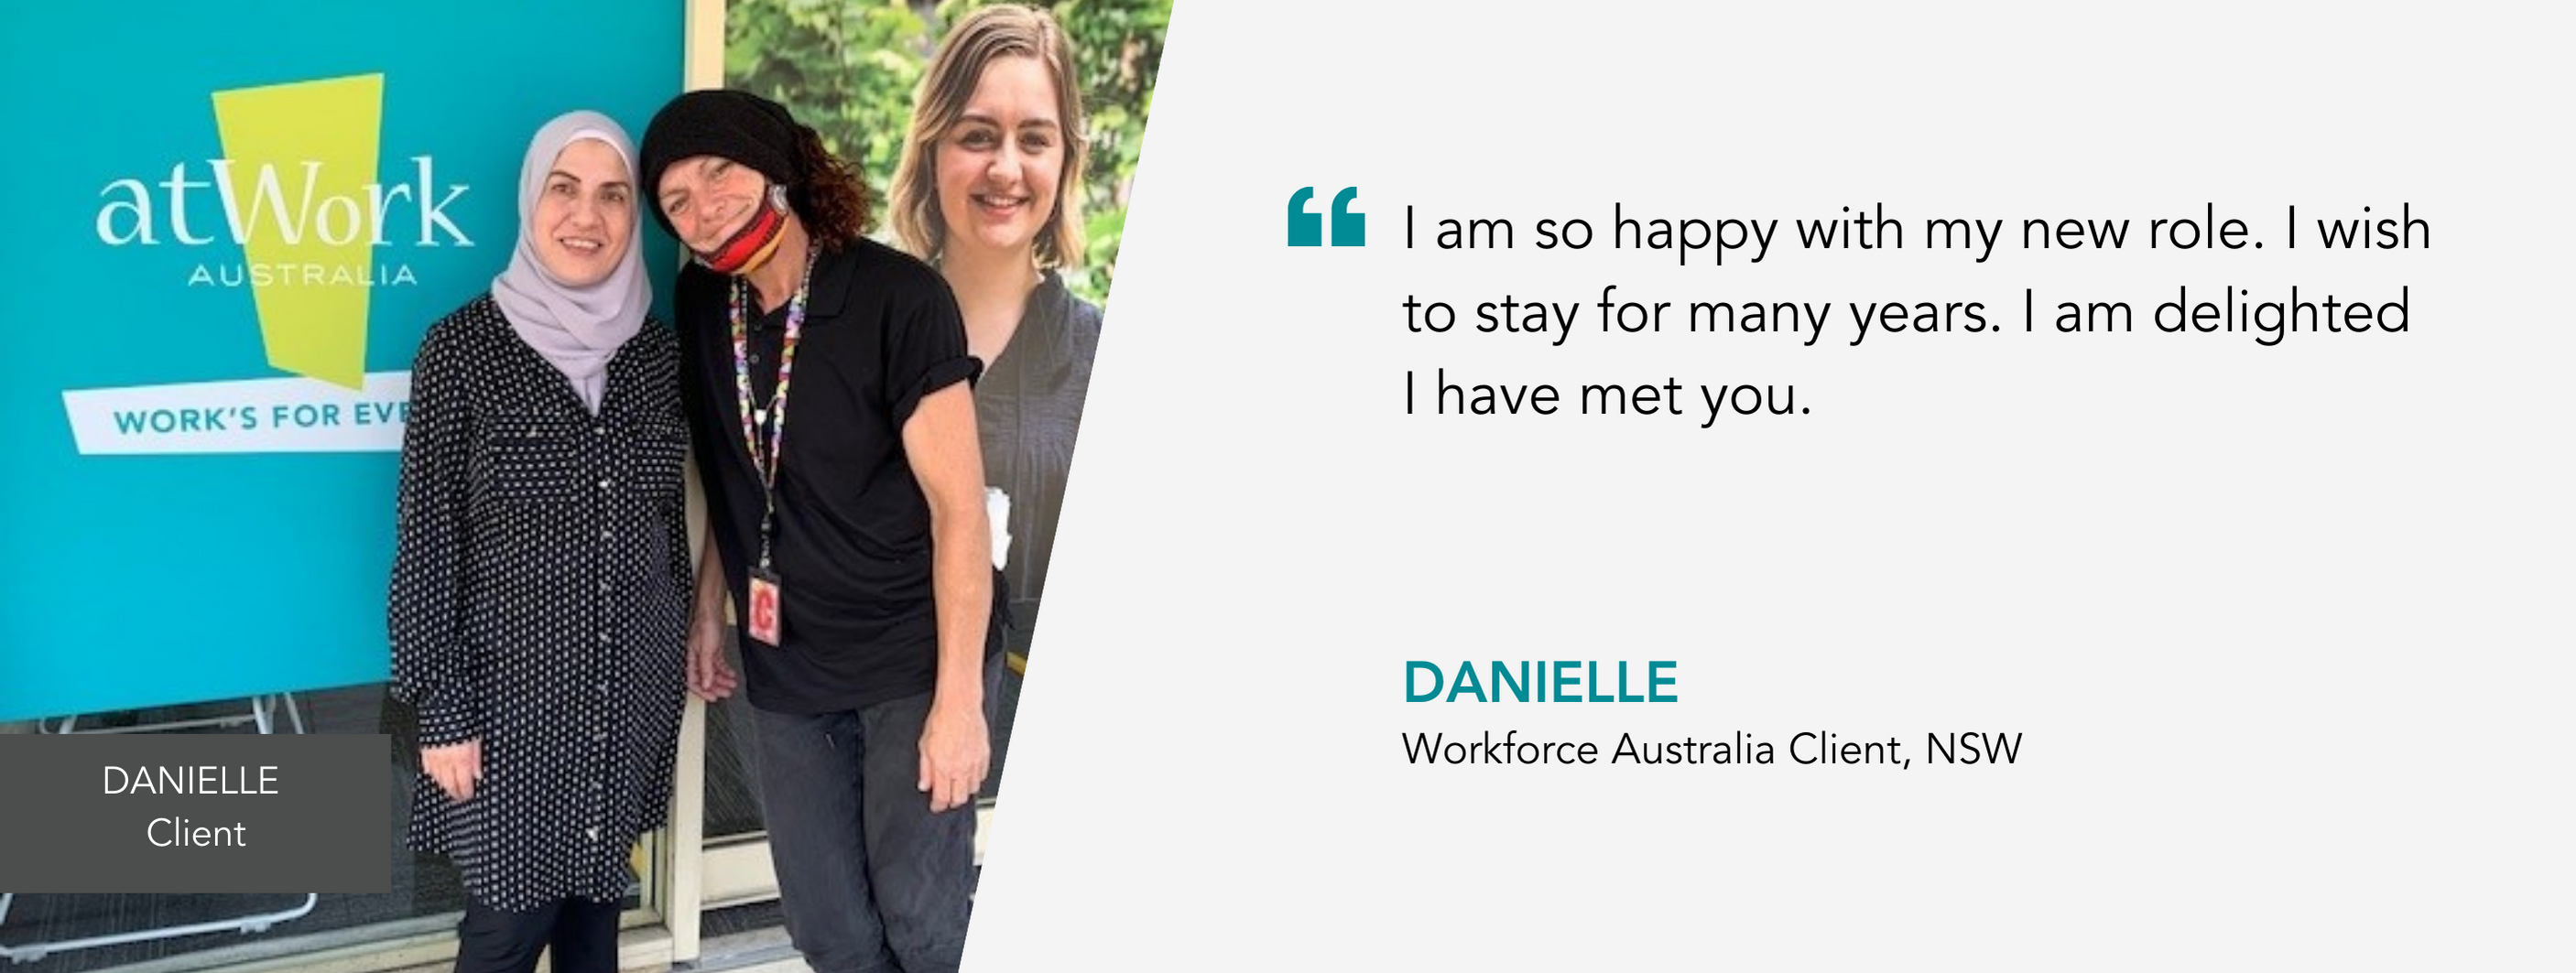 I am so happy with my new role. I wish to stay for many years. I am delighted I have met you. Danielle, Workforce Australia Client, NSW